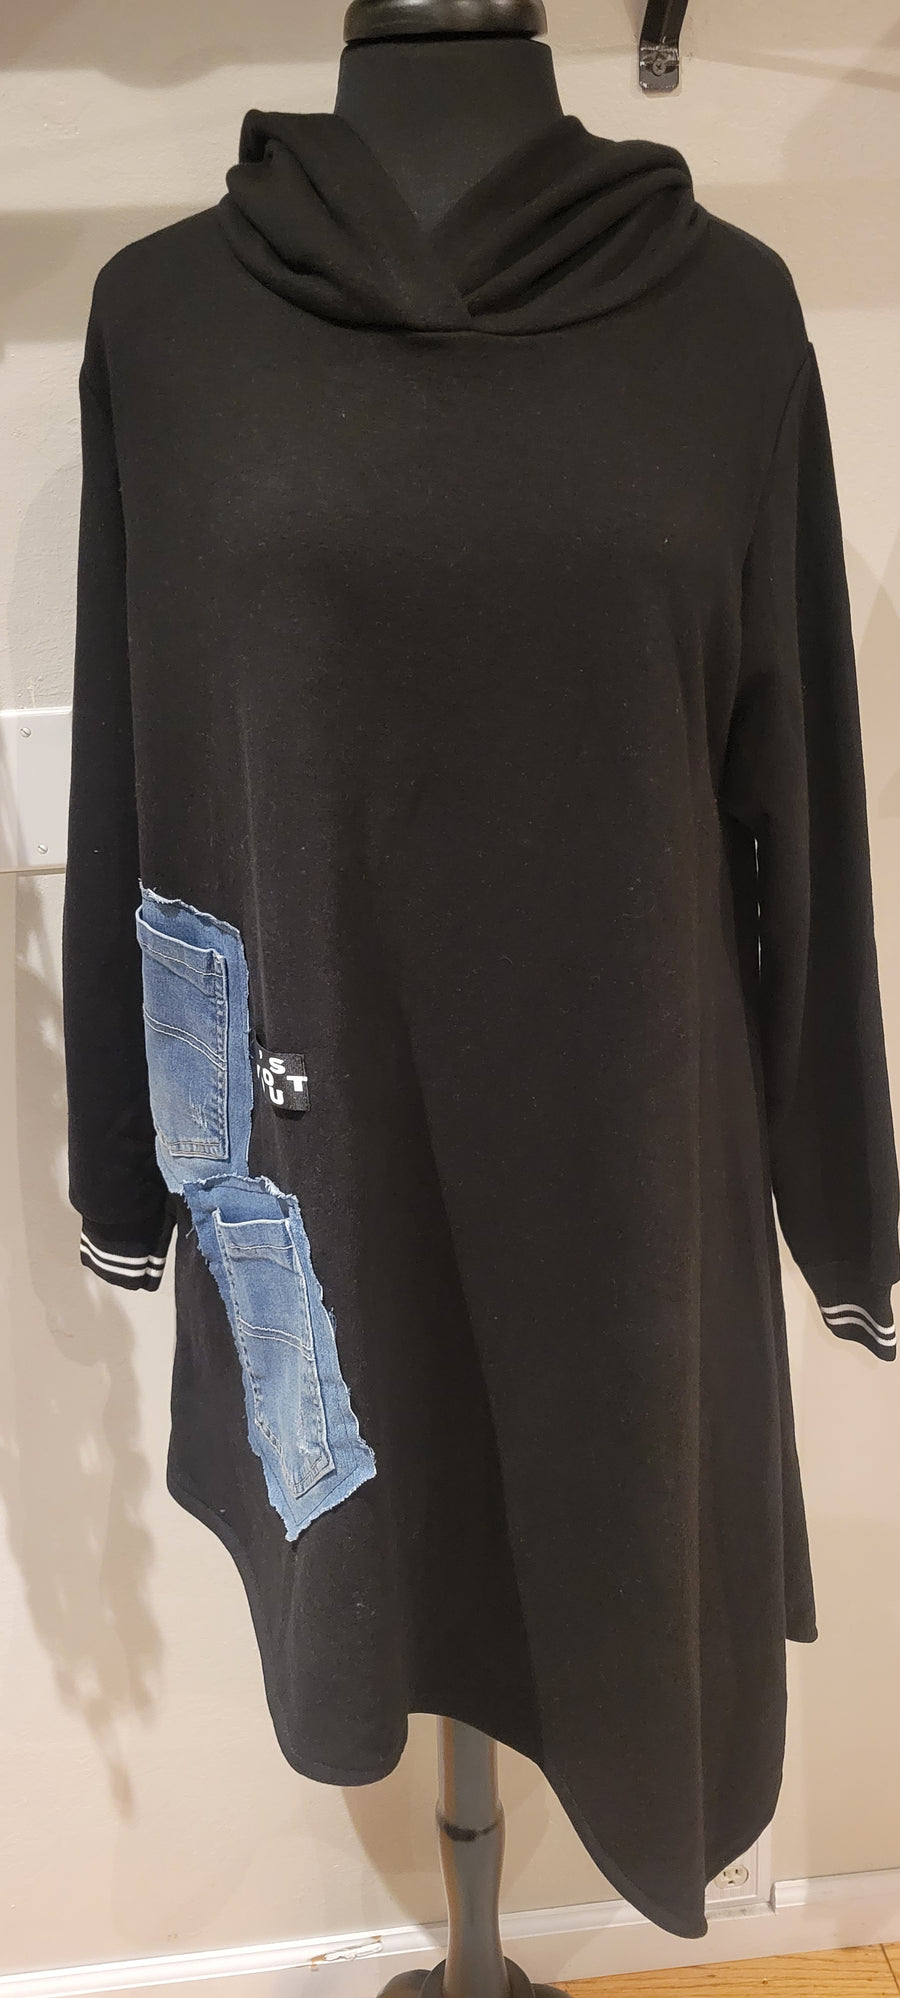 Black Hoodie for women with Denim Patchwork Pocket and striped wrist cuffs, asymmetrical women's tunic